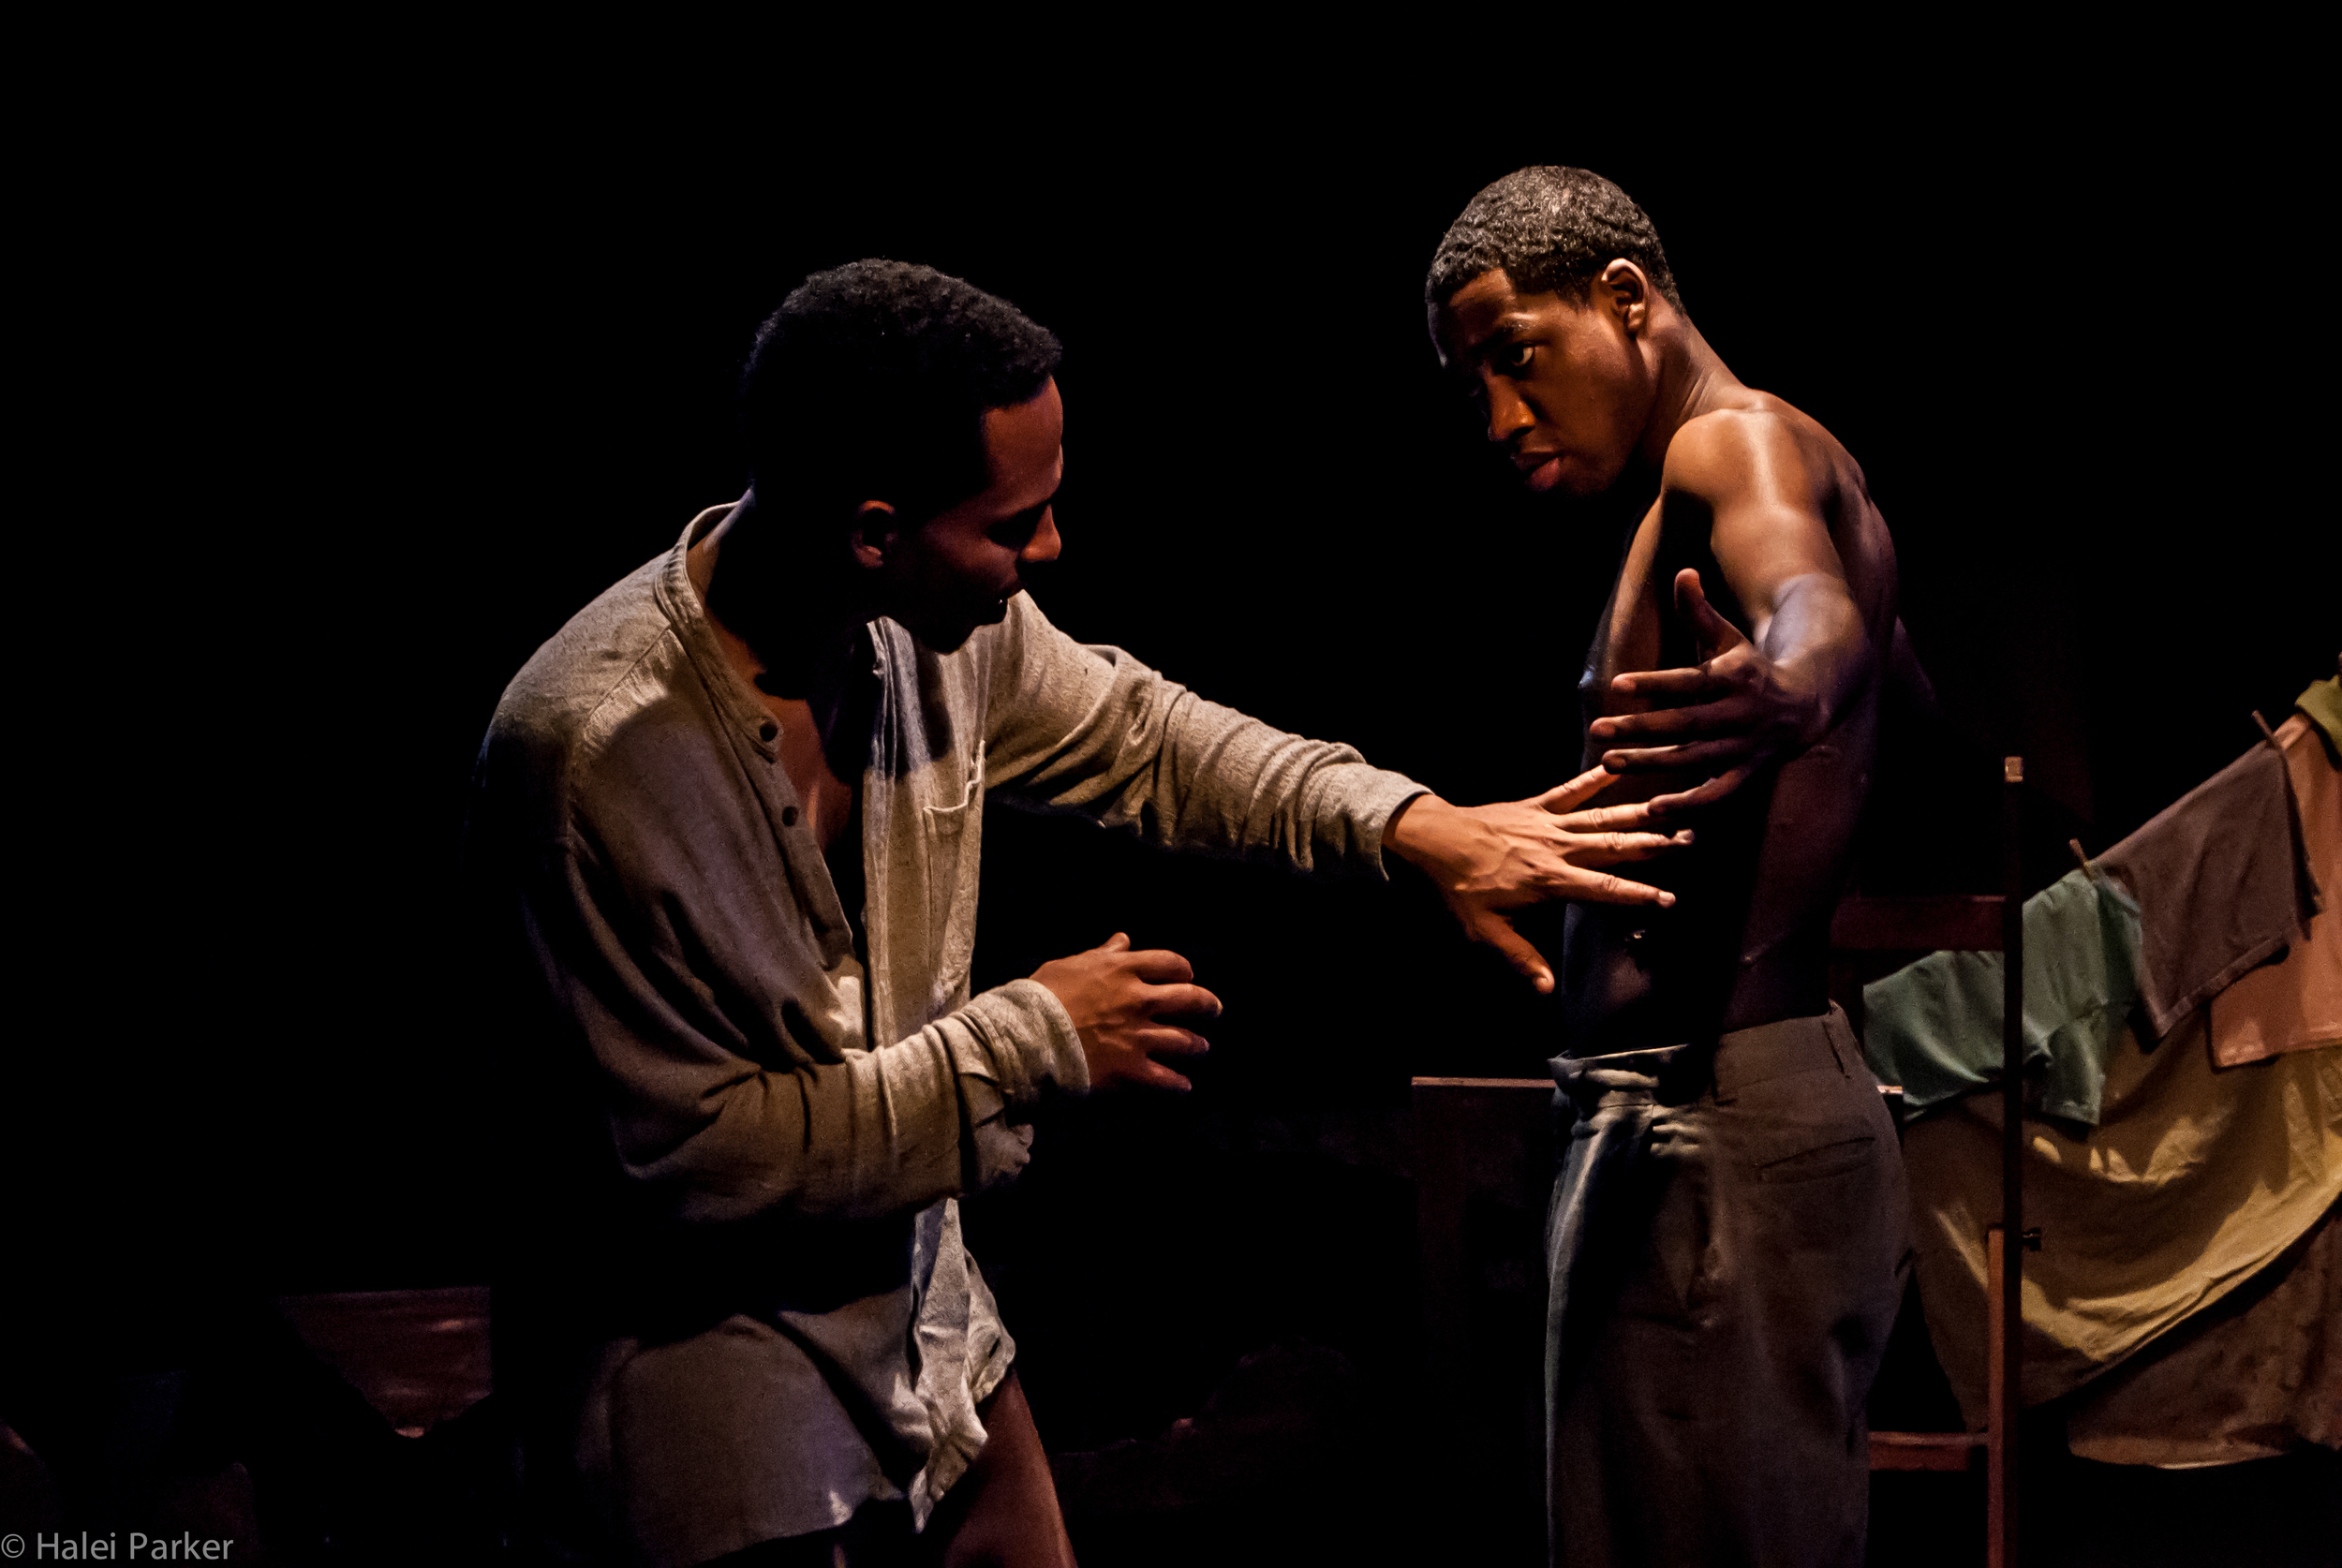 Edwin (Gerard Joseph) touches the scars that Henri-Max (Maurice Williams) got while being tortured by Duvalier's boogiemen.